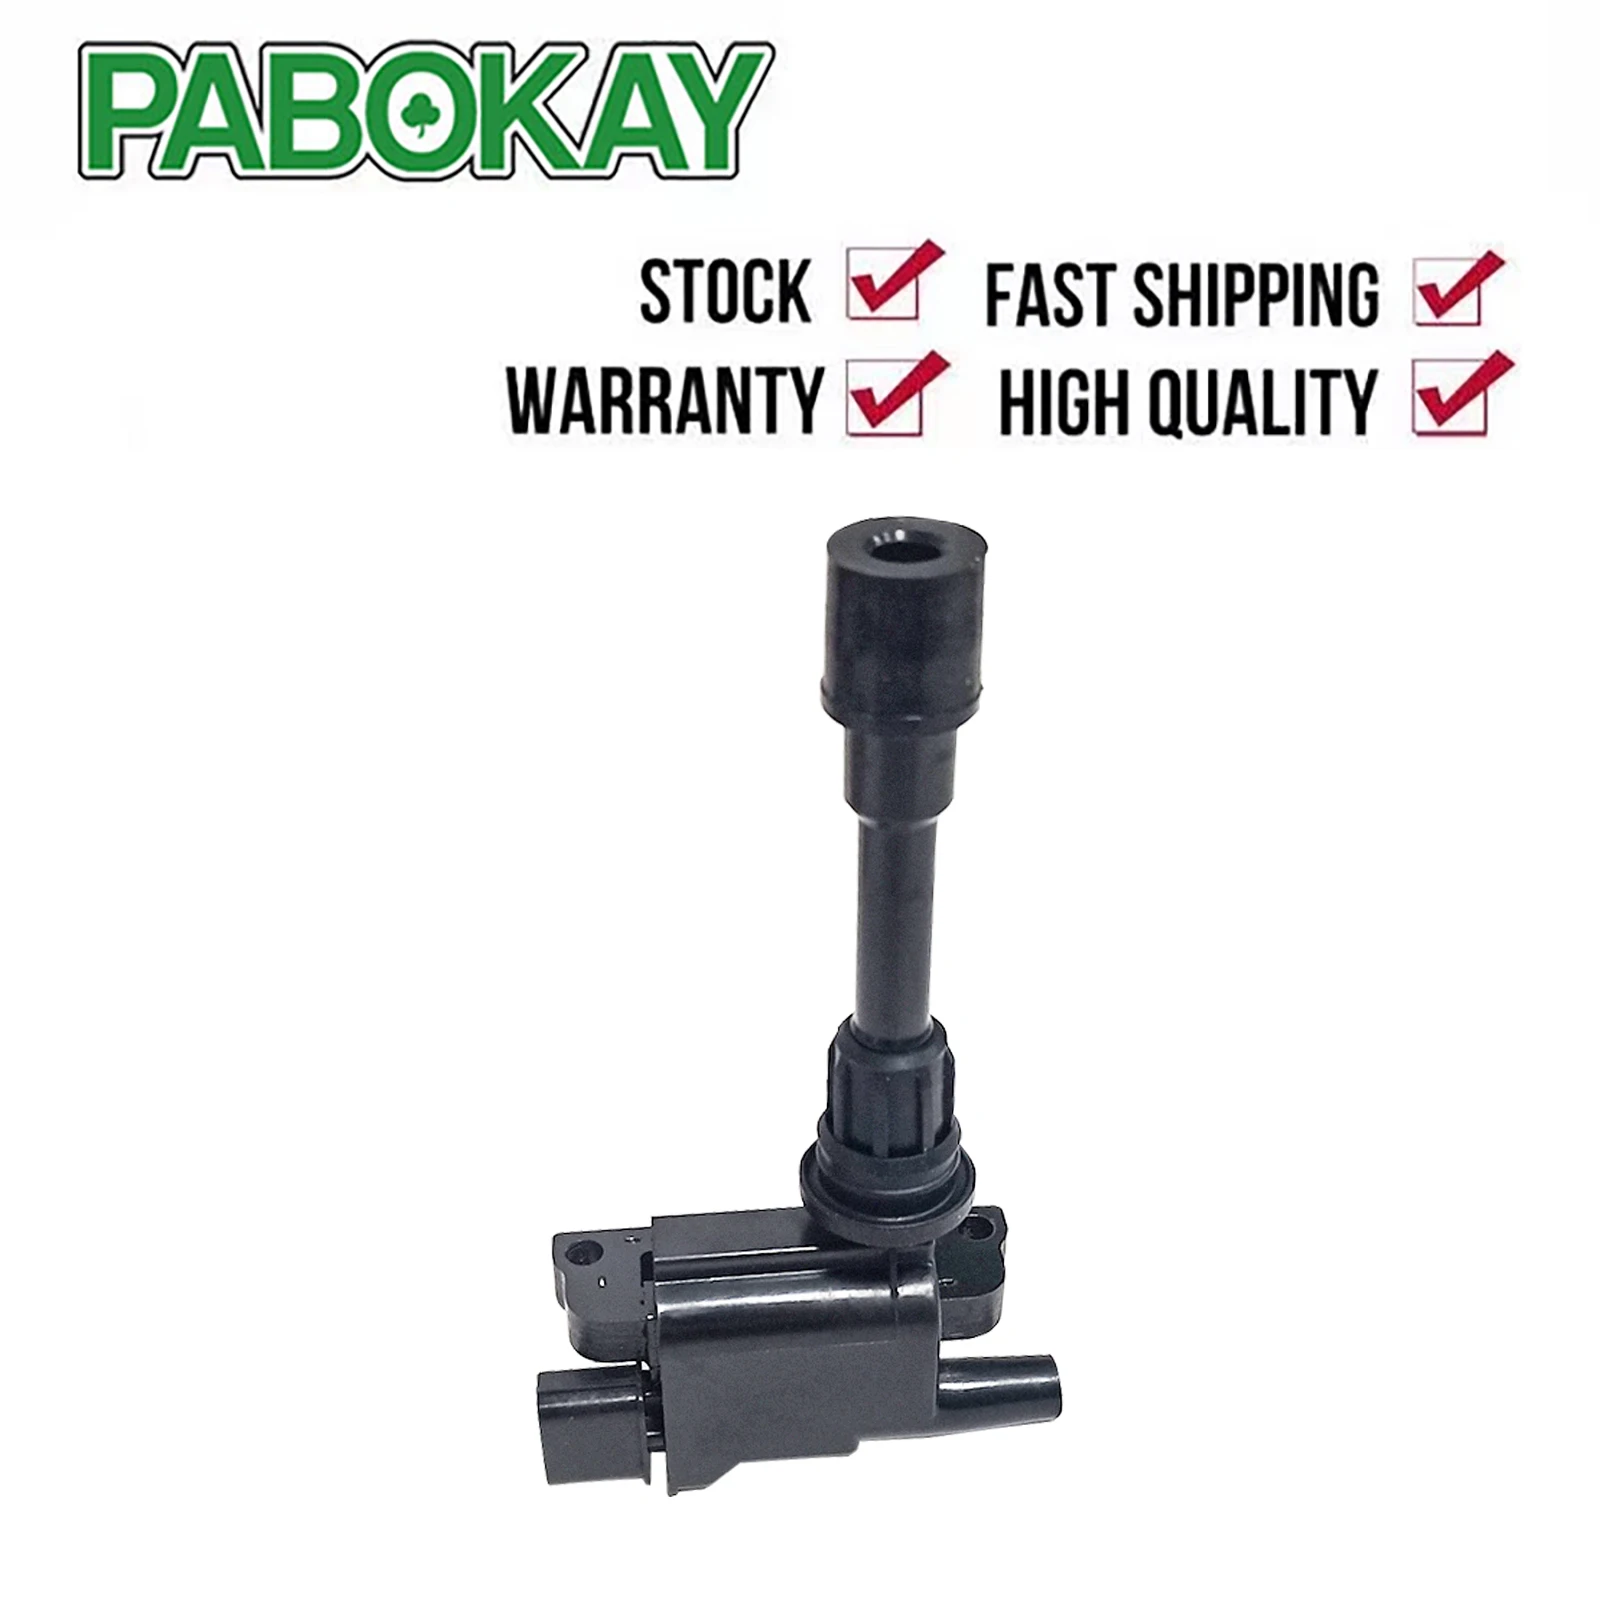 

Ignition Coil for Mazda 323 BJ Premacy 1.9 2.0 1999-05 FFY118100 FFY1-18-100 FP8518100A FP8518100B FP8518100C IC17124 FPY118100